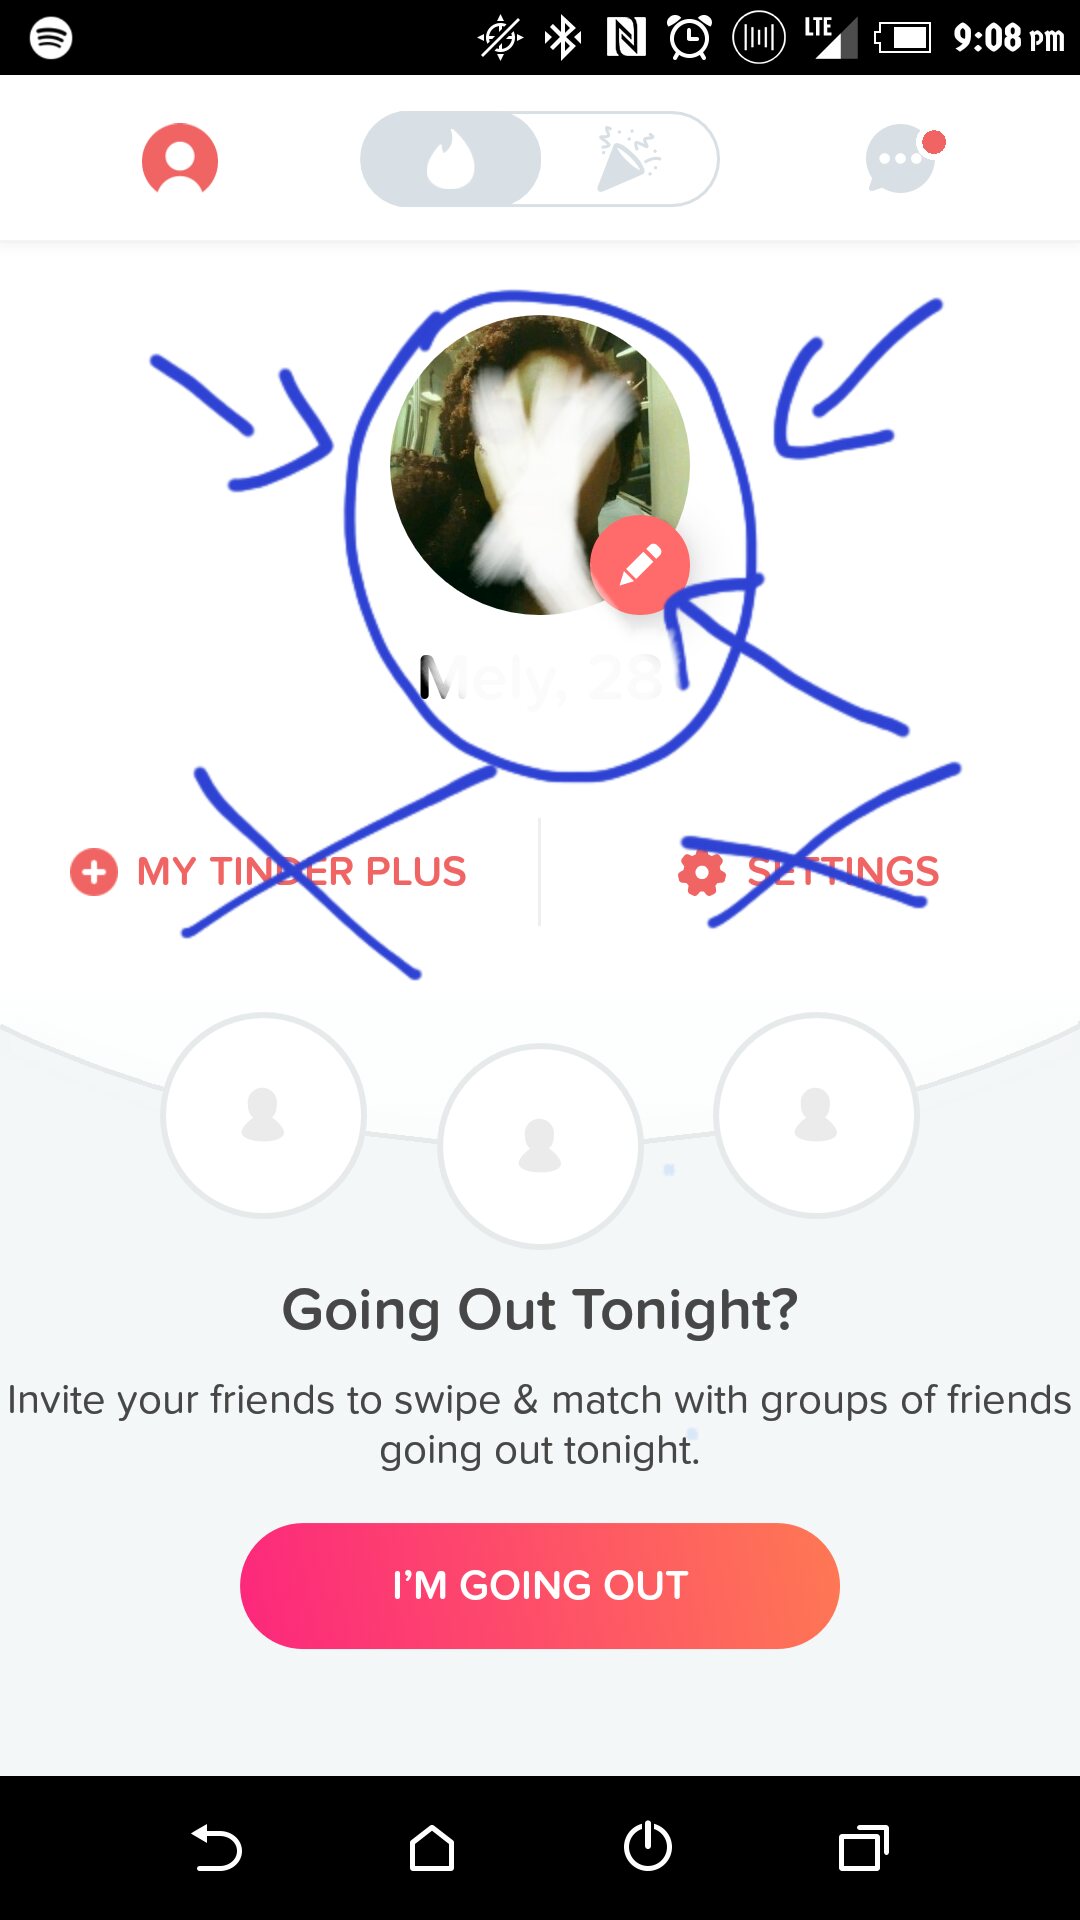 Tinder Launches Feed Feature to Show Matches Your Instagram and Spotify Accounts